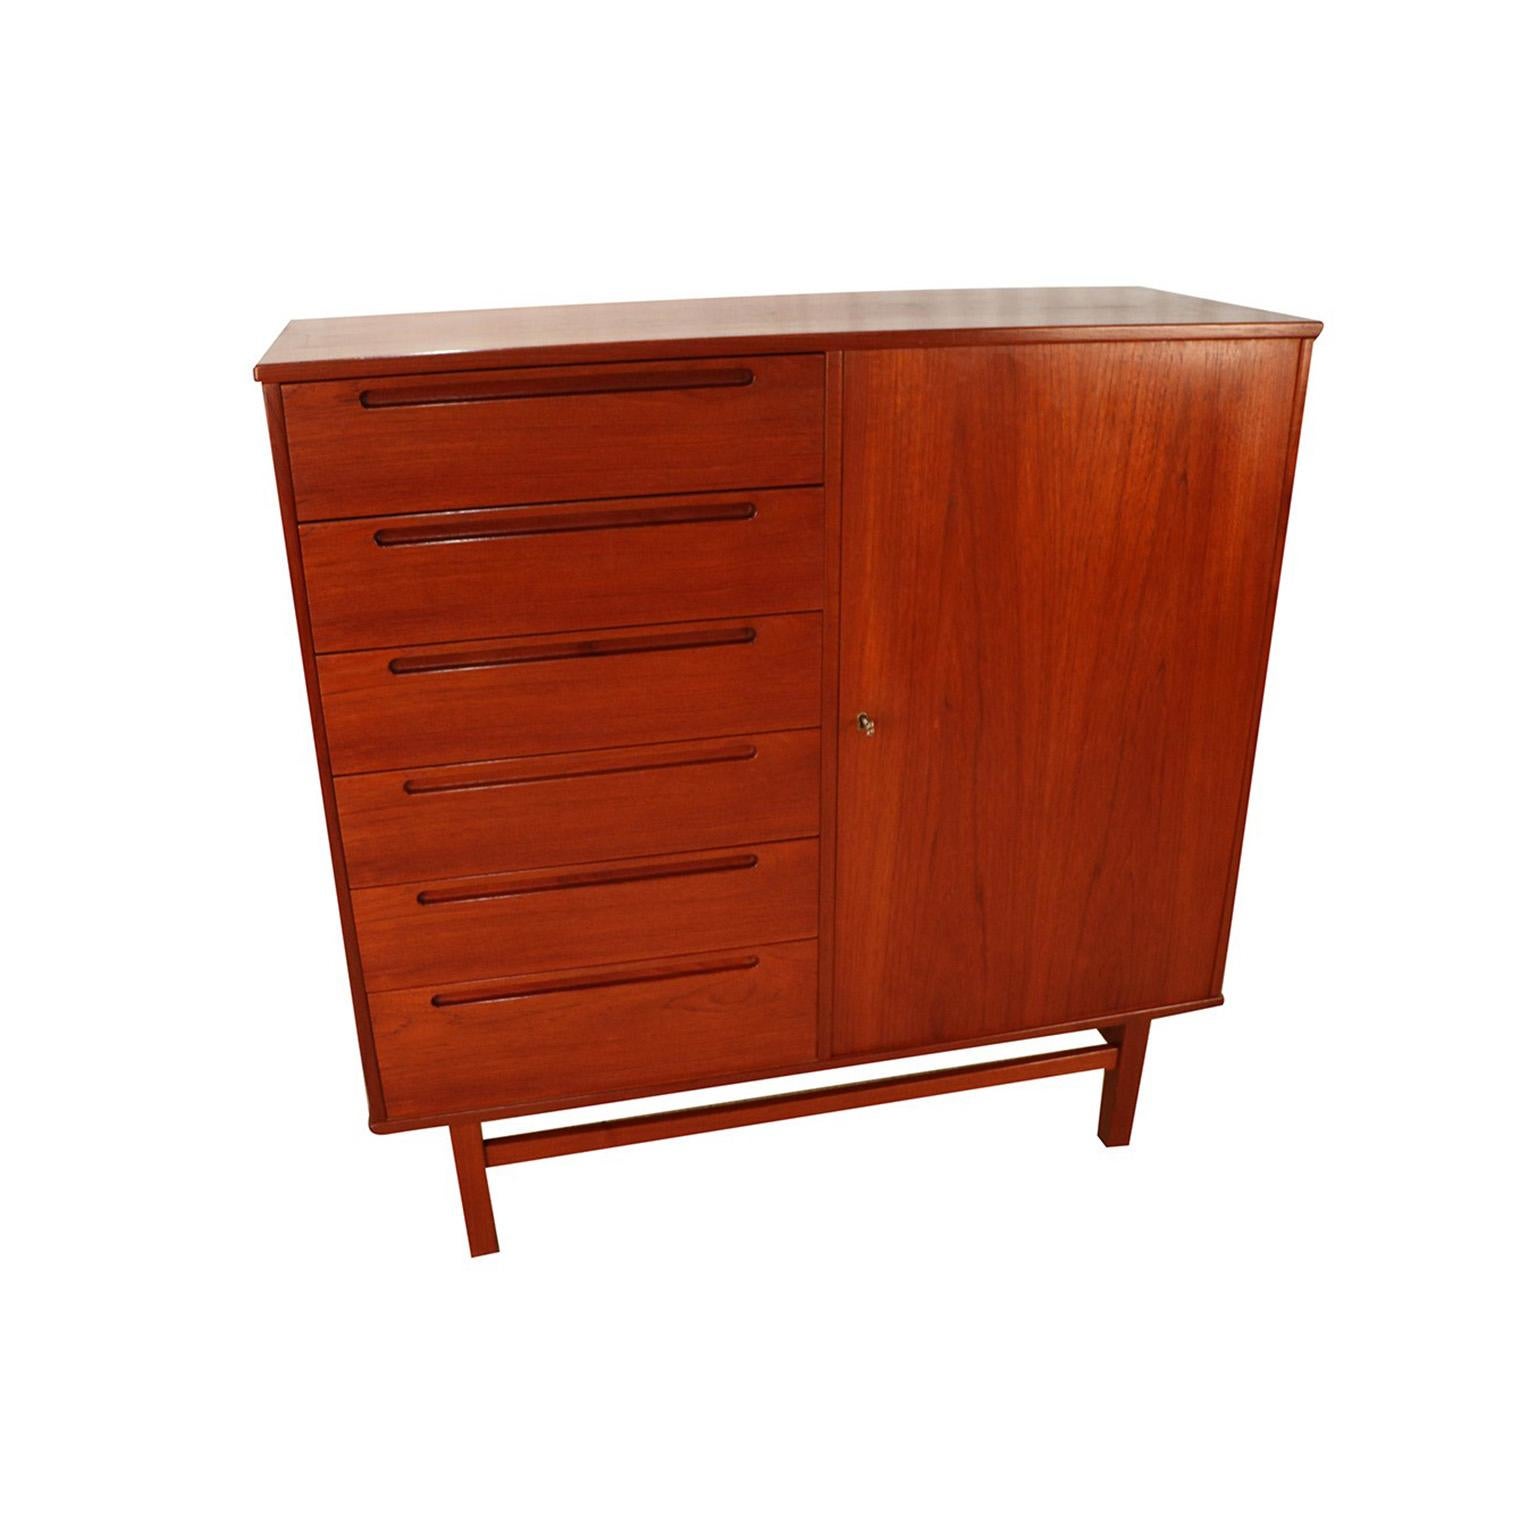 Handsome highboy gentleman’s chest designed by Nils Jonsson for Torring and manufactured by HJN Mobler, Denmark circa, 1960. Featuring Classic, clean modern lines and beautifully grained teak wood characteristic of Danish Mid-Century Modern design